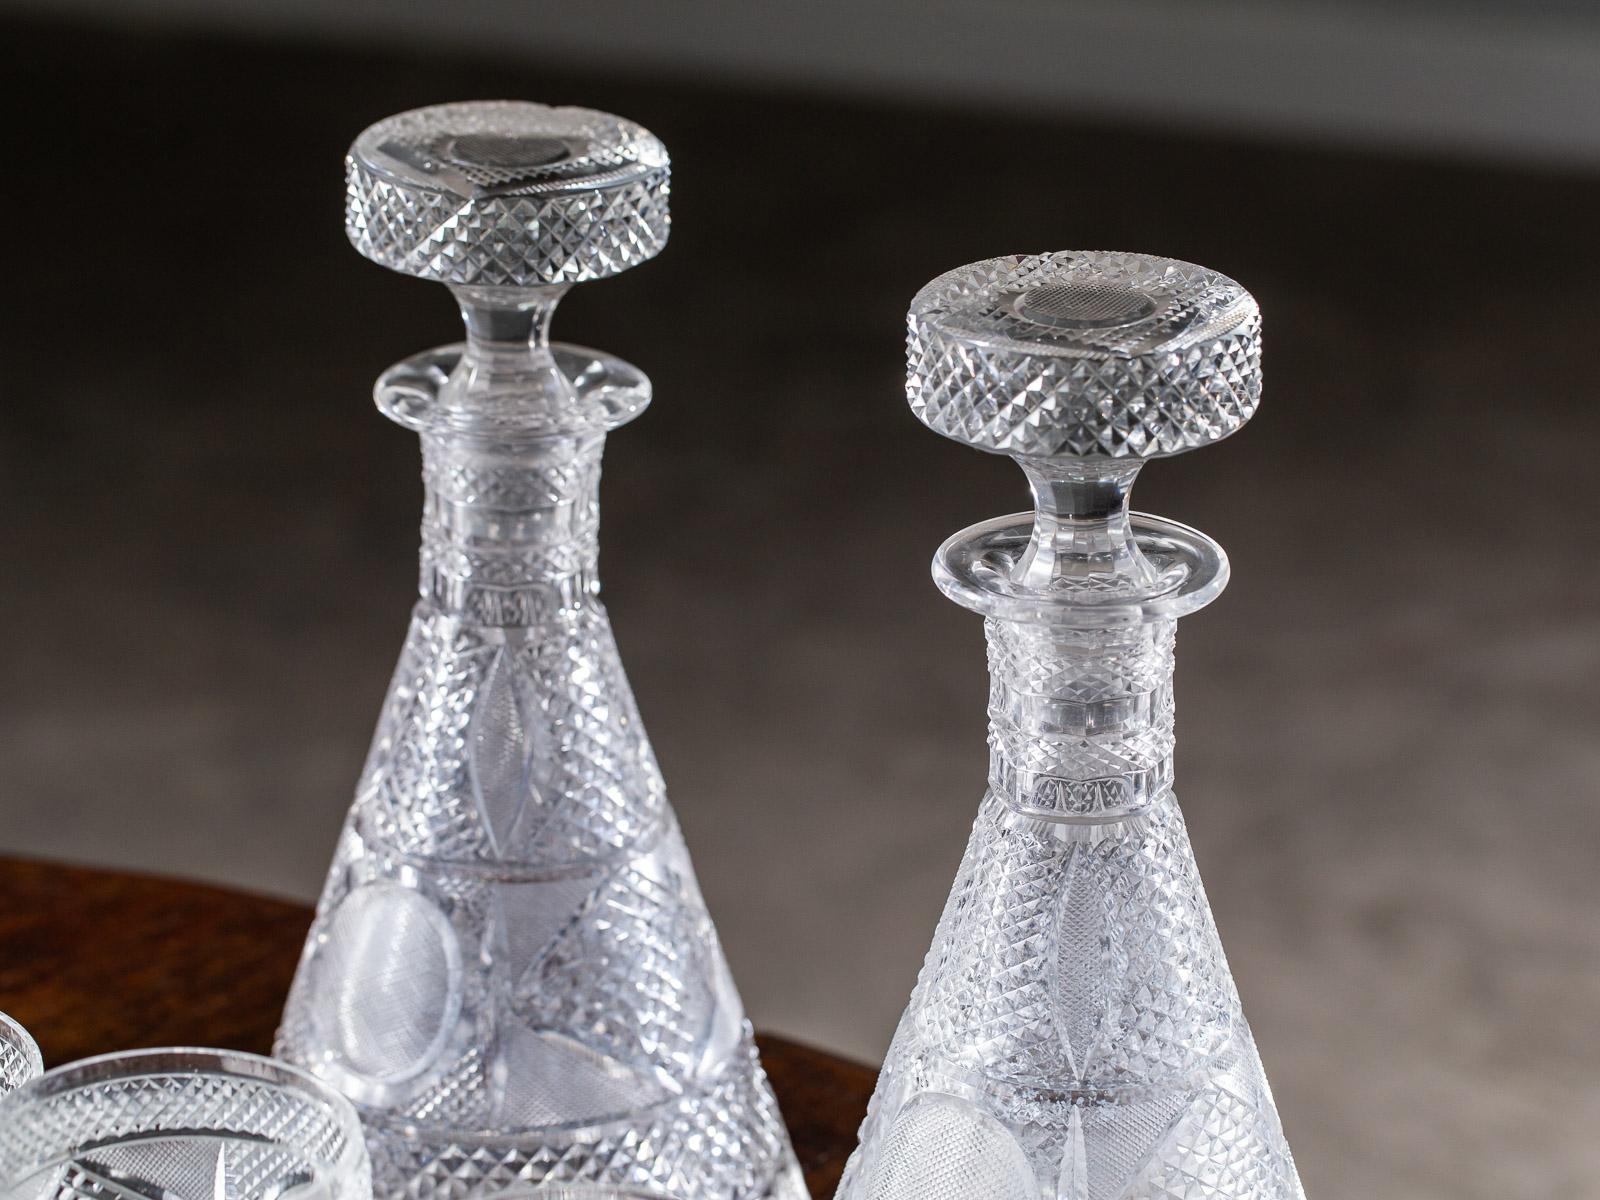 A set of exceptional antique Irish Georgian style cut crystal decanters and glasses circa 1875. Featuring two decanters with stoppers and an assortment of red wine, white wine, water and liqueur glasses this set is notable for the square bases of